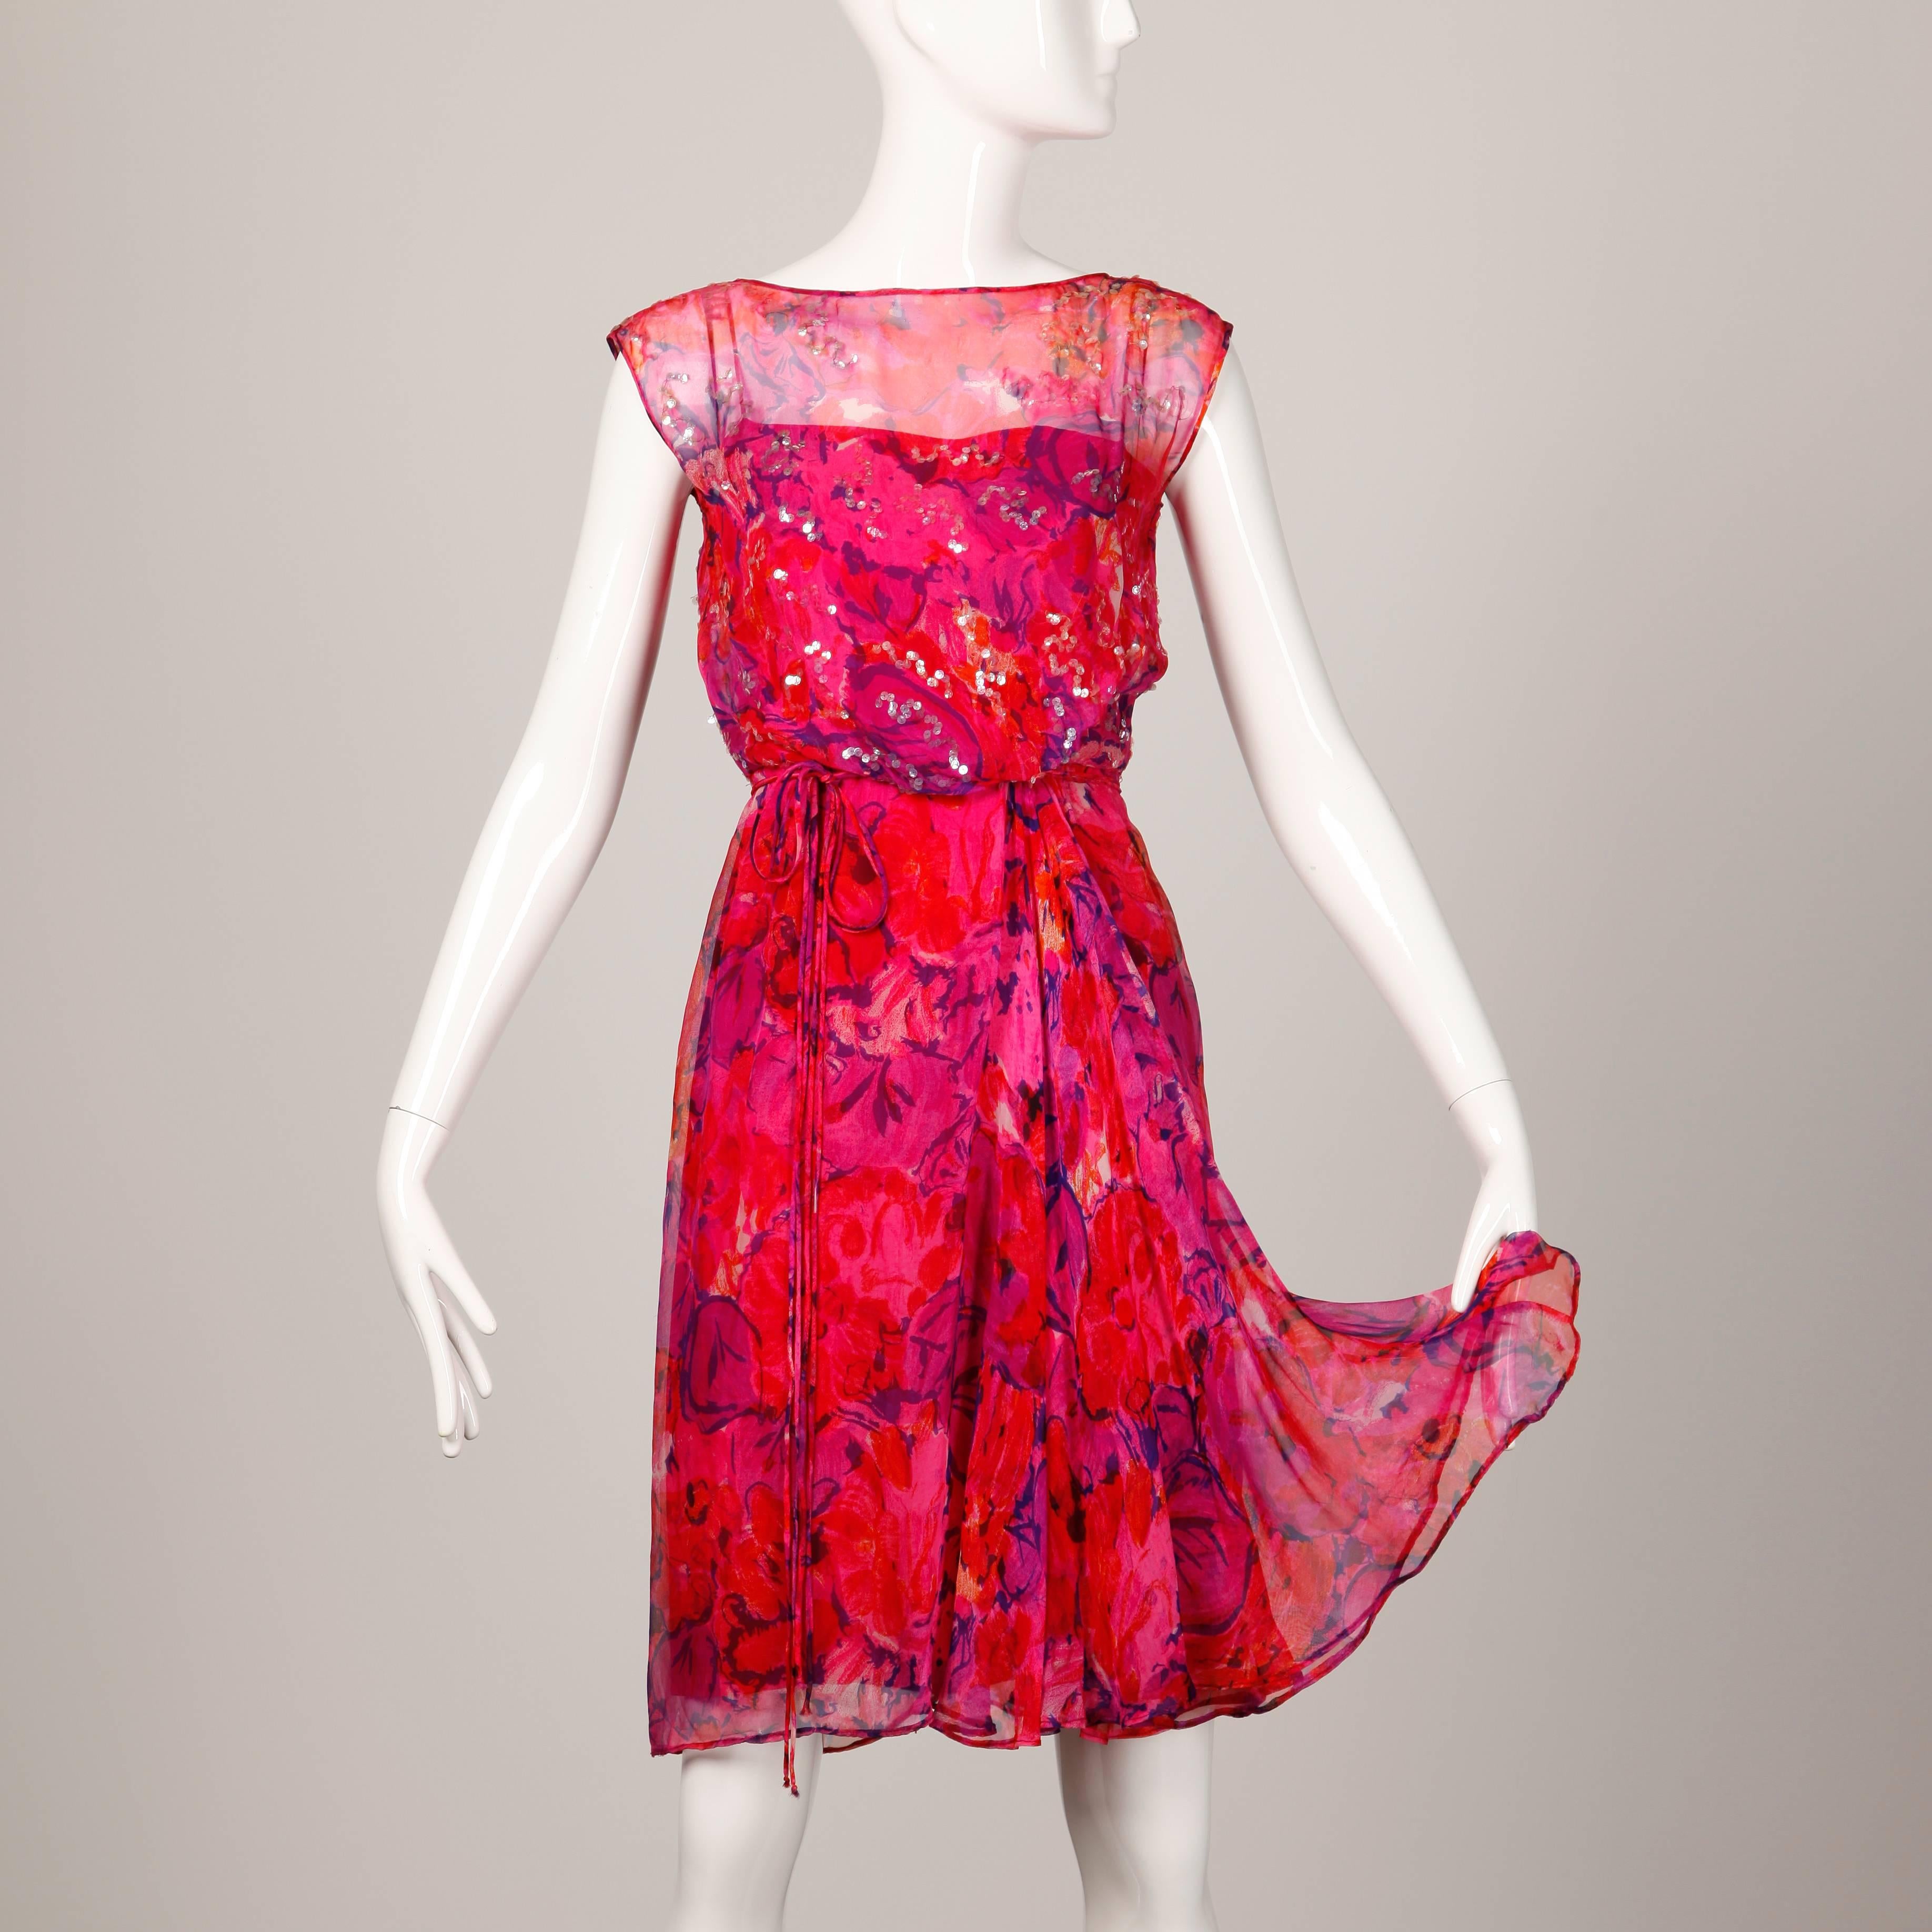 Beautiful delicate tissue silk chiffon cocktail dress in a vibrant floral print. Clear sequin embellishment and matching waist tie.

Details: 

Fully Lined
Back Metal Zip with Hook and Eye Closure
Marked Size: Unmarked
Estimated Size: XS-